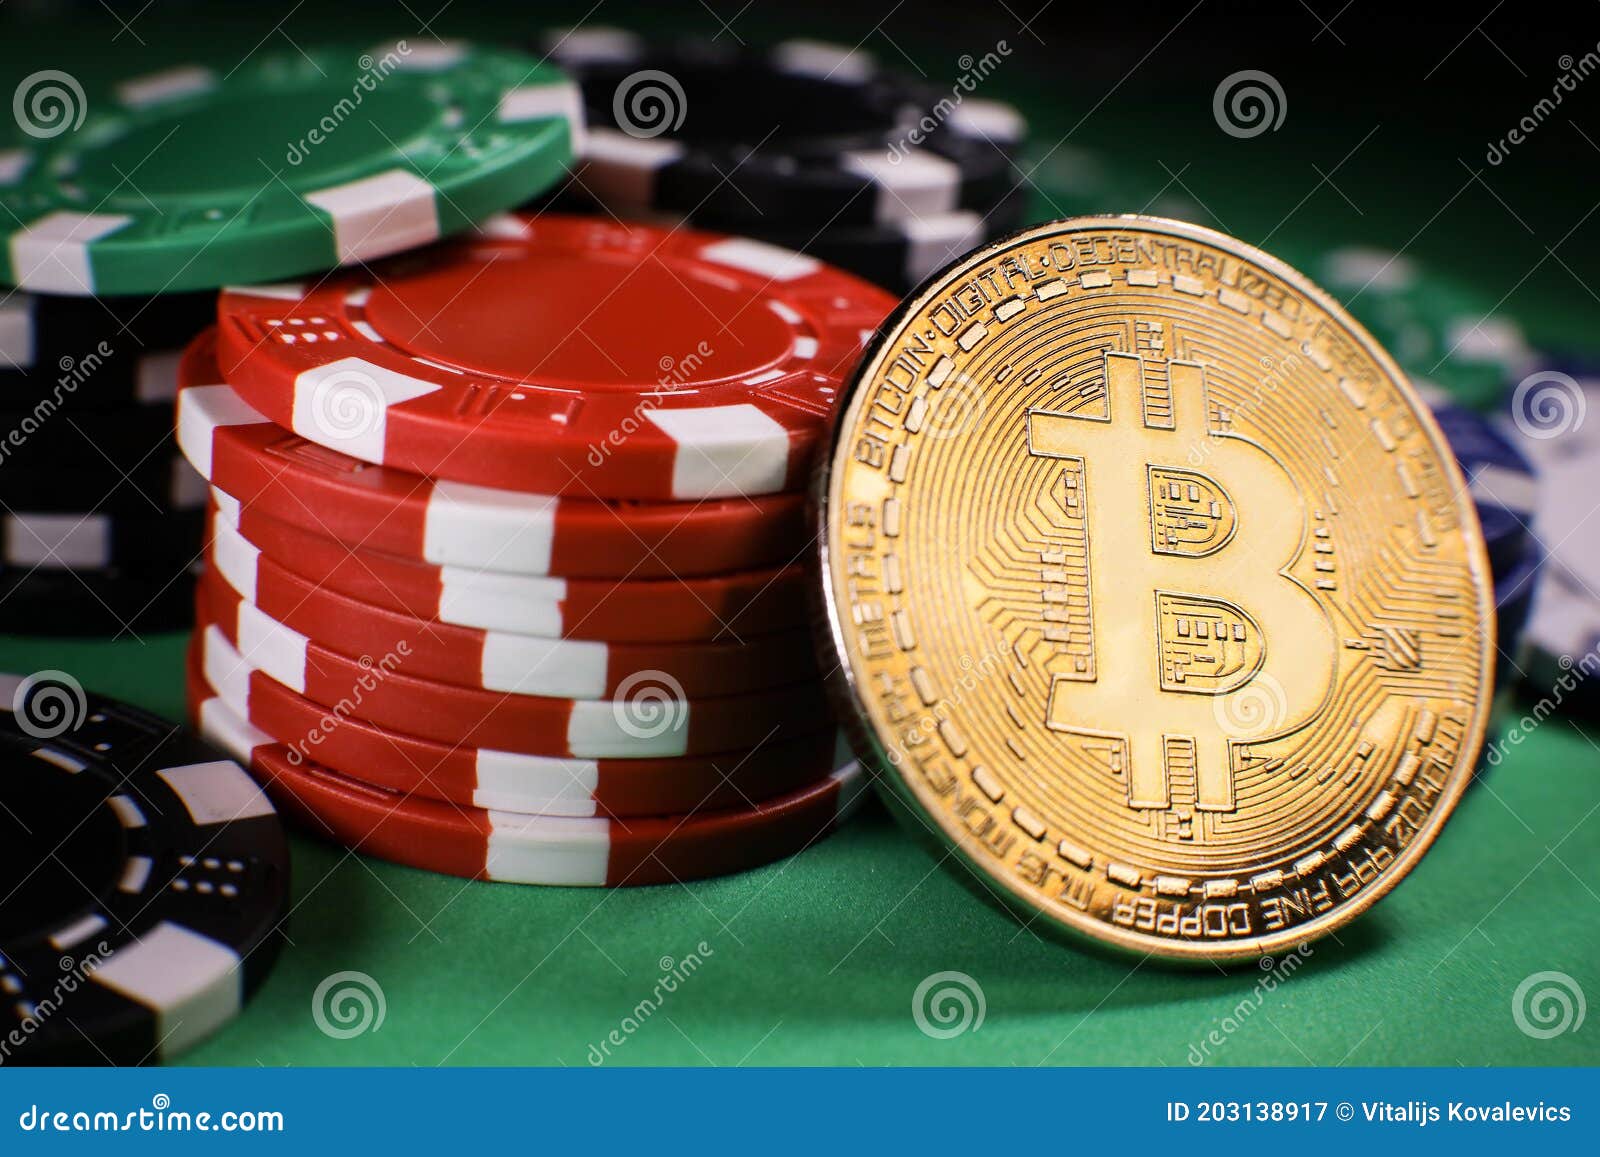 Don't Just Sit There! Start online crypto casinos